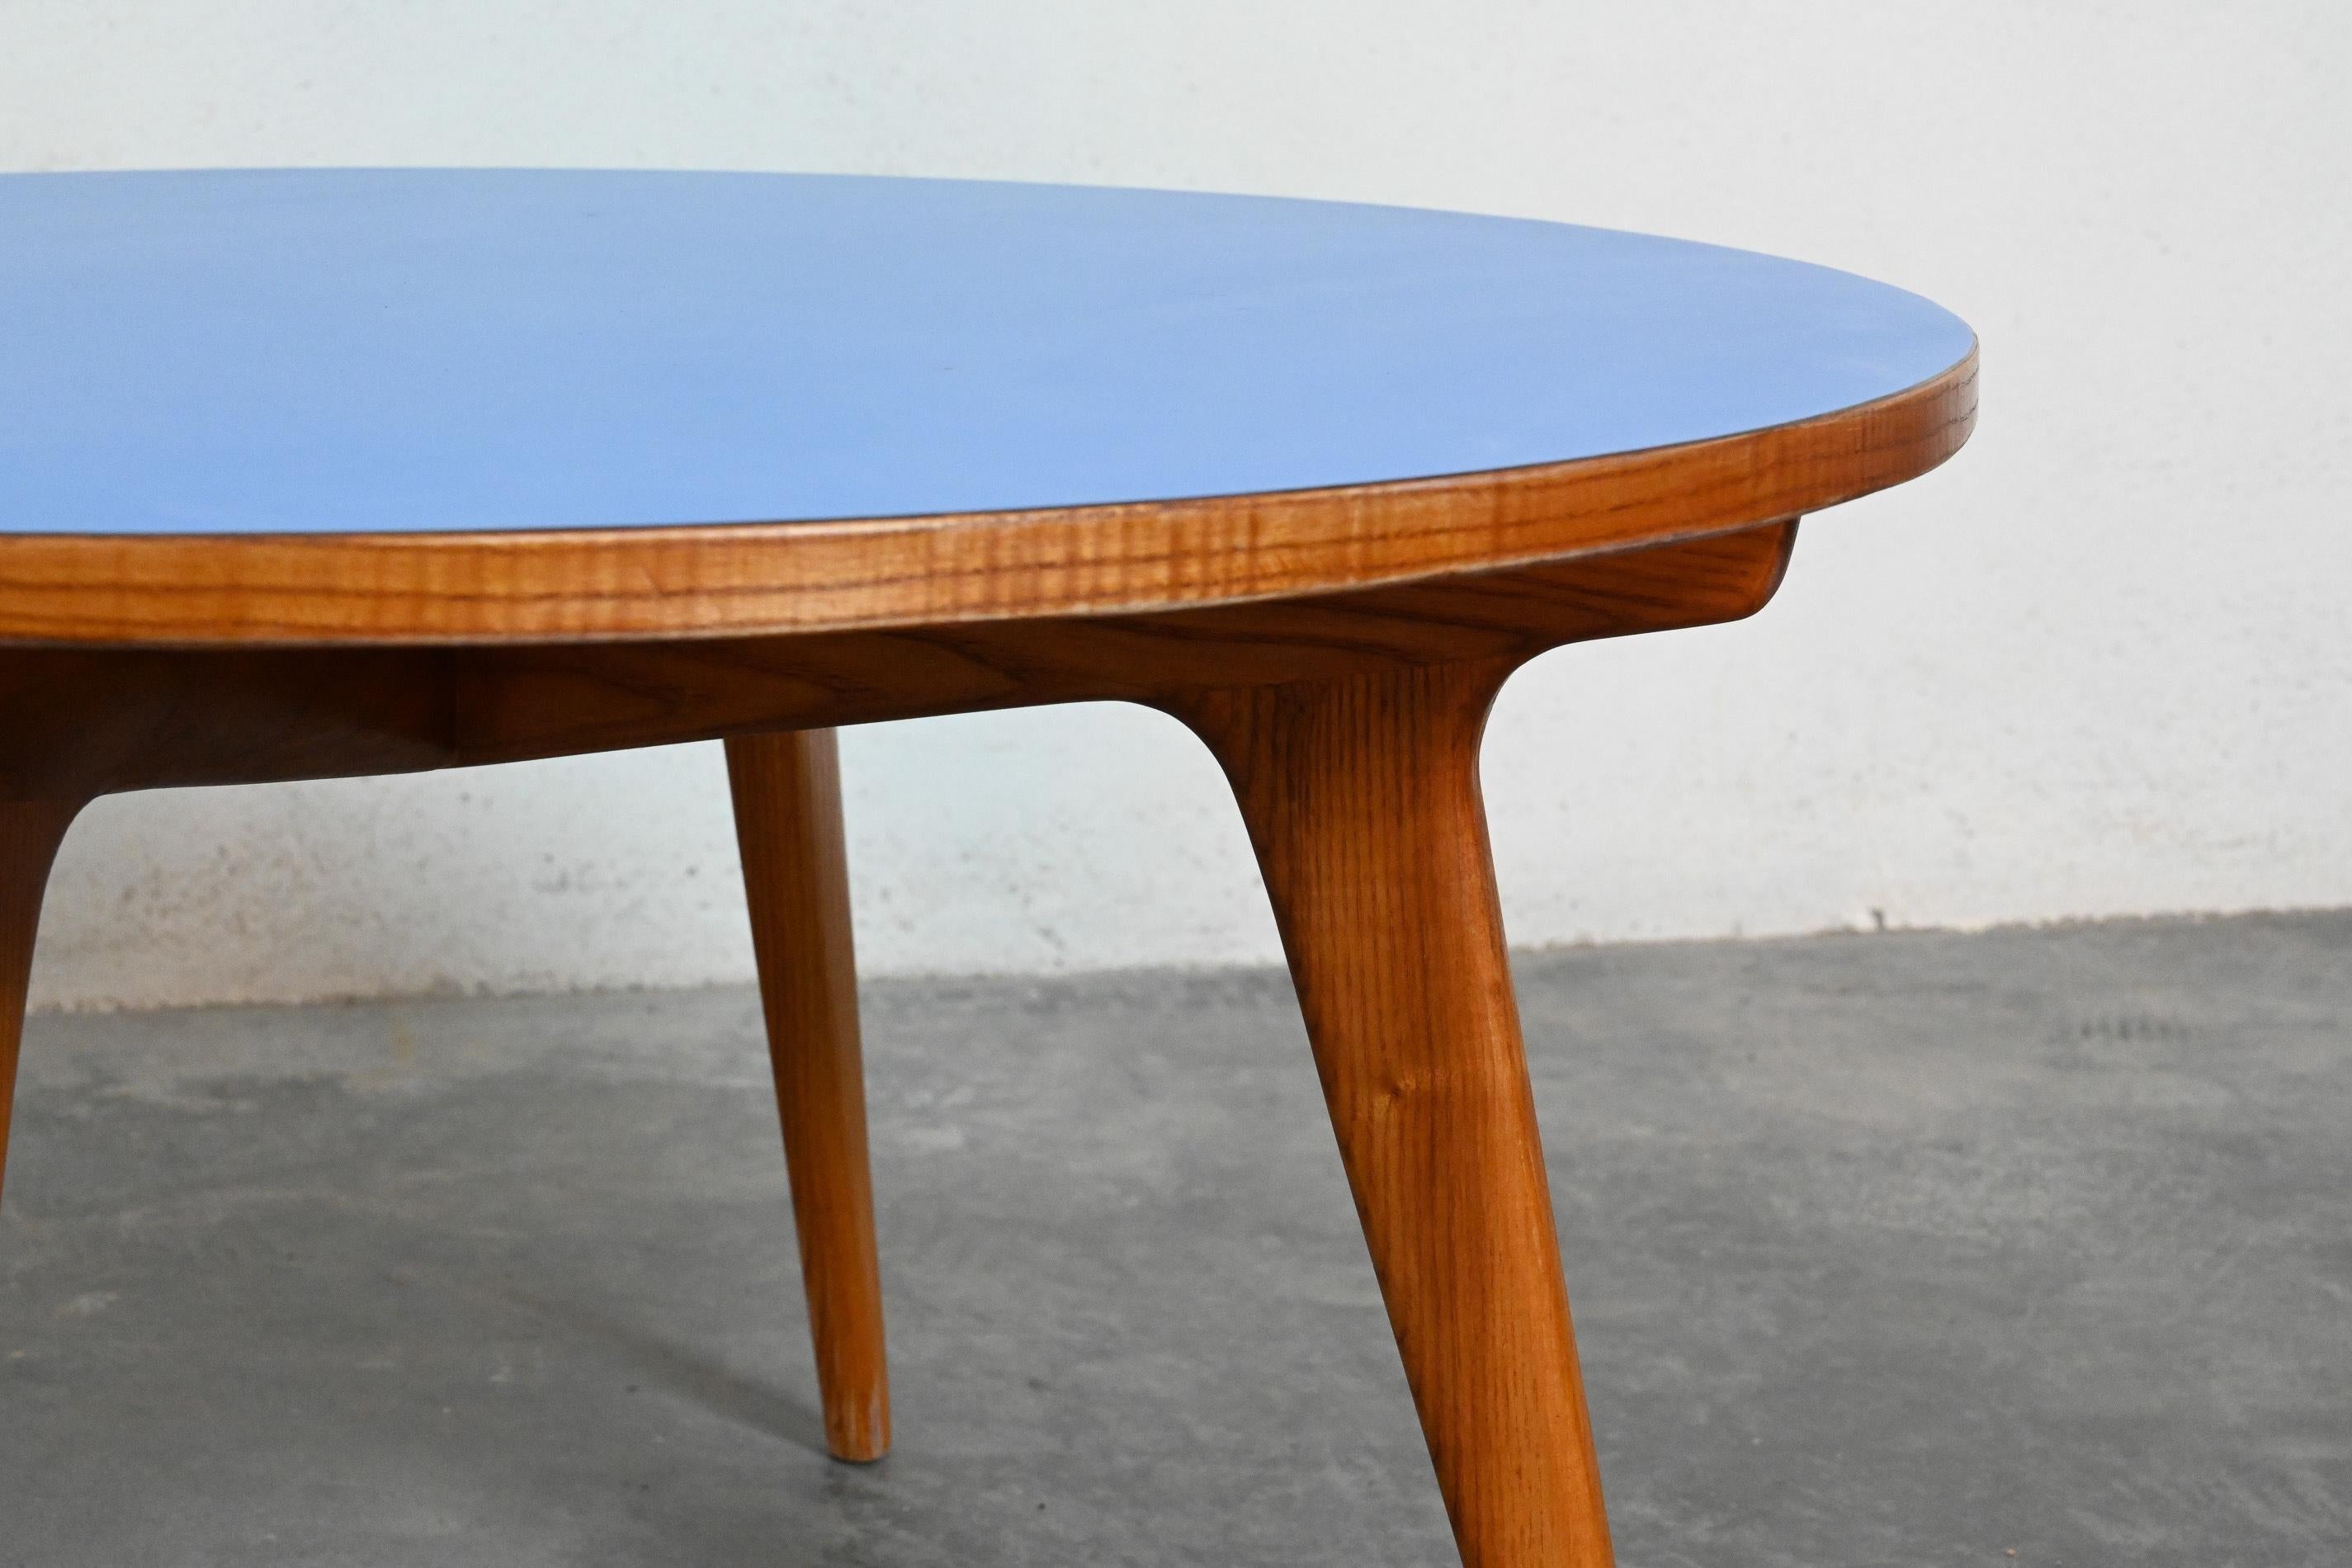 Gio Ponti style maple wood and blue laminate circular low table

reminiscent of the furniture designed for the Hotel Parco dei Principi in Sorrento.

Purchased directly from the Ponti family

The furniture for the Hotel Parco dei Principi in